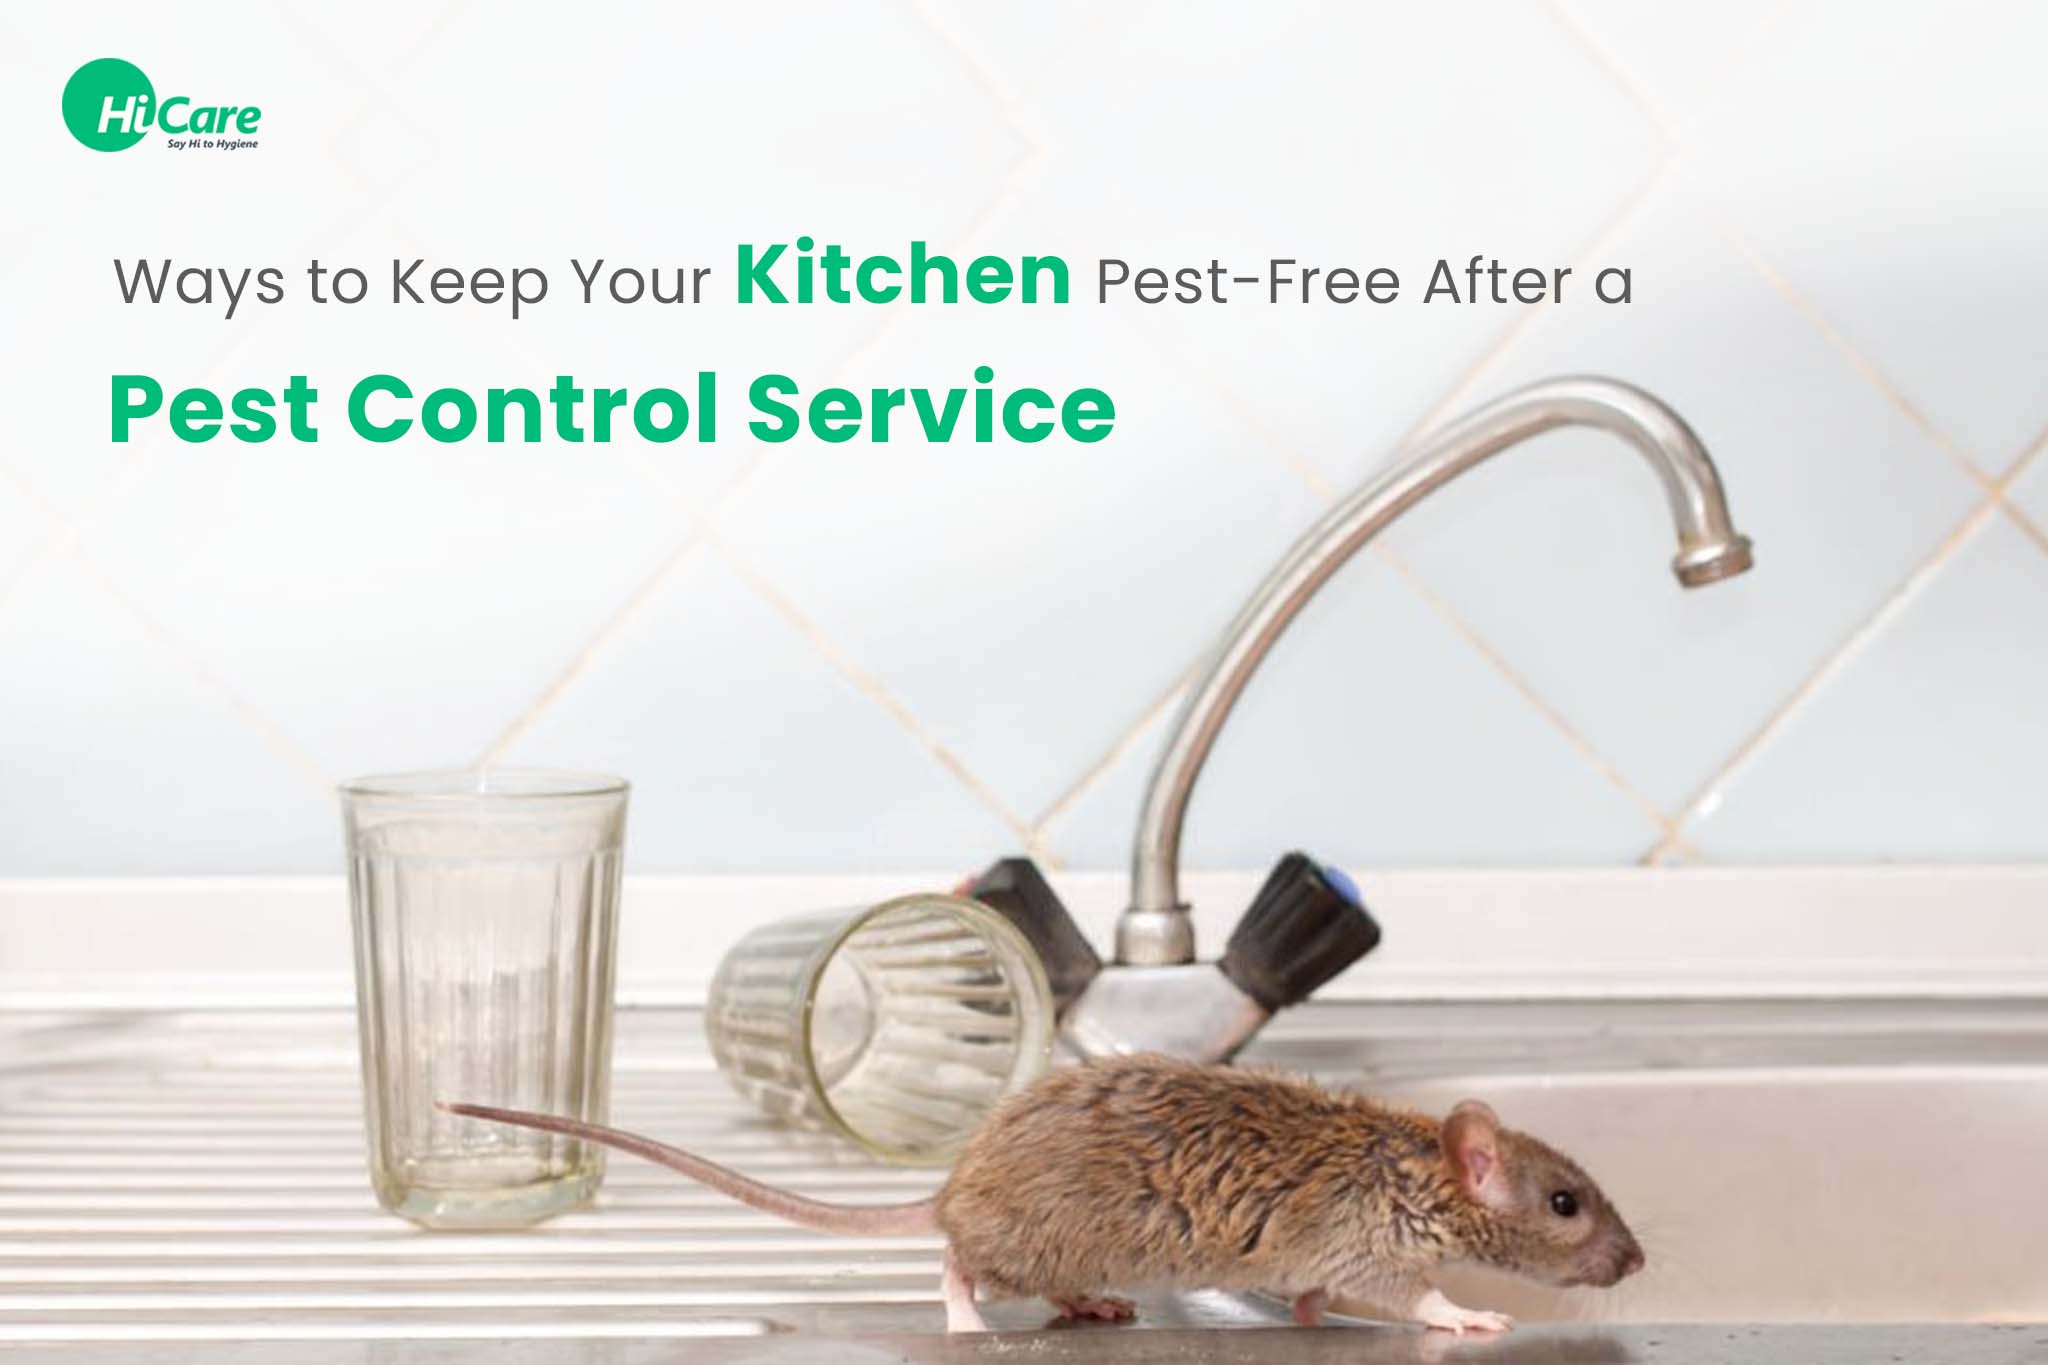 6 Ways to Keep Your Kitchen Pest-Free After Pest Control Service